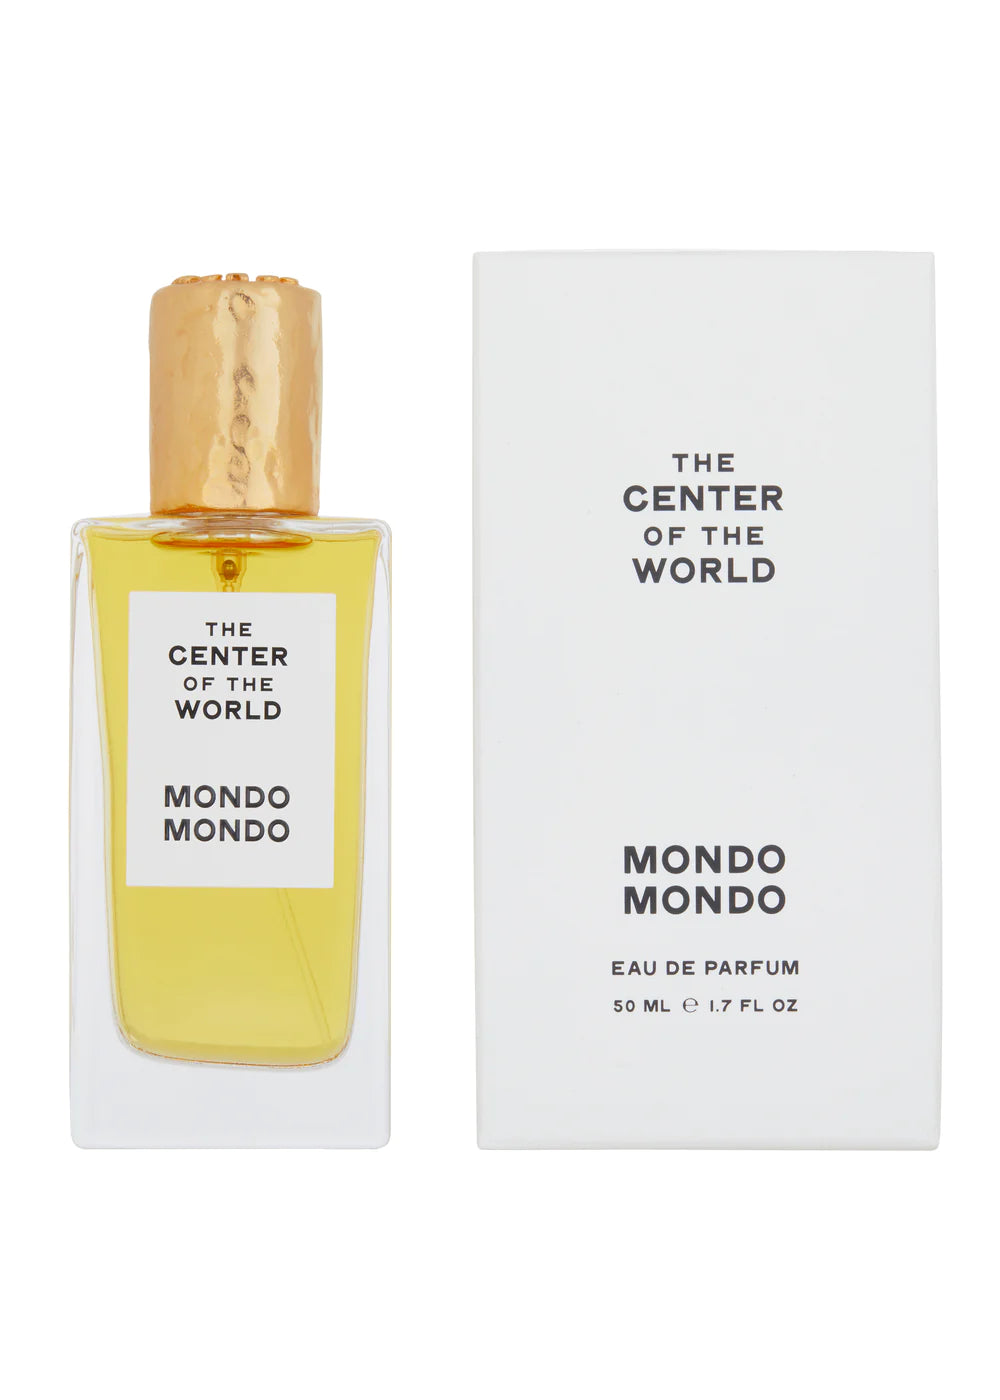 The Center of the World, 50 mL.